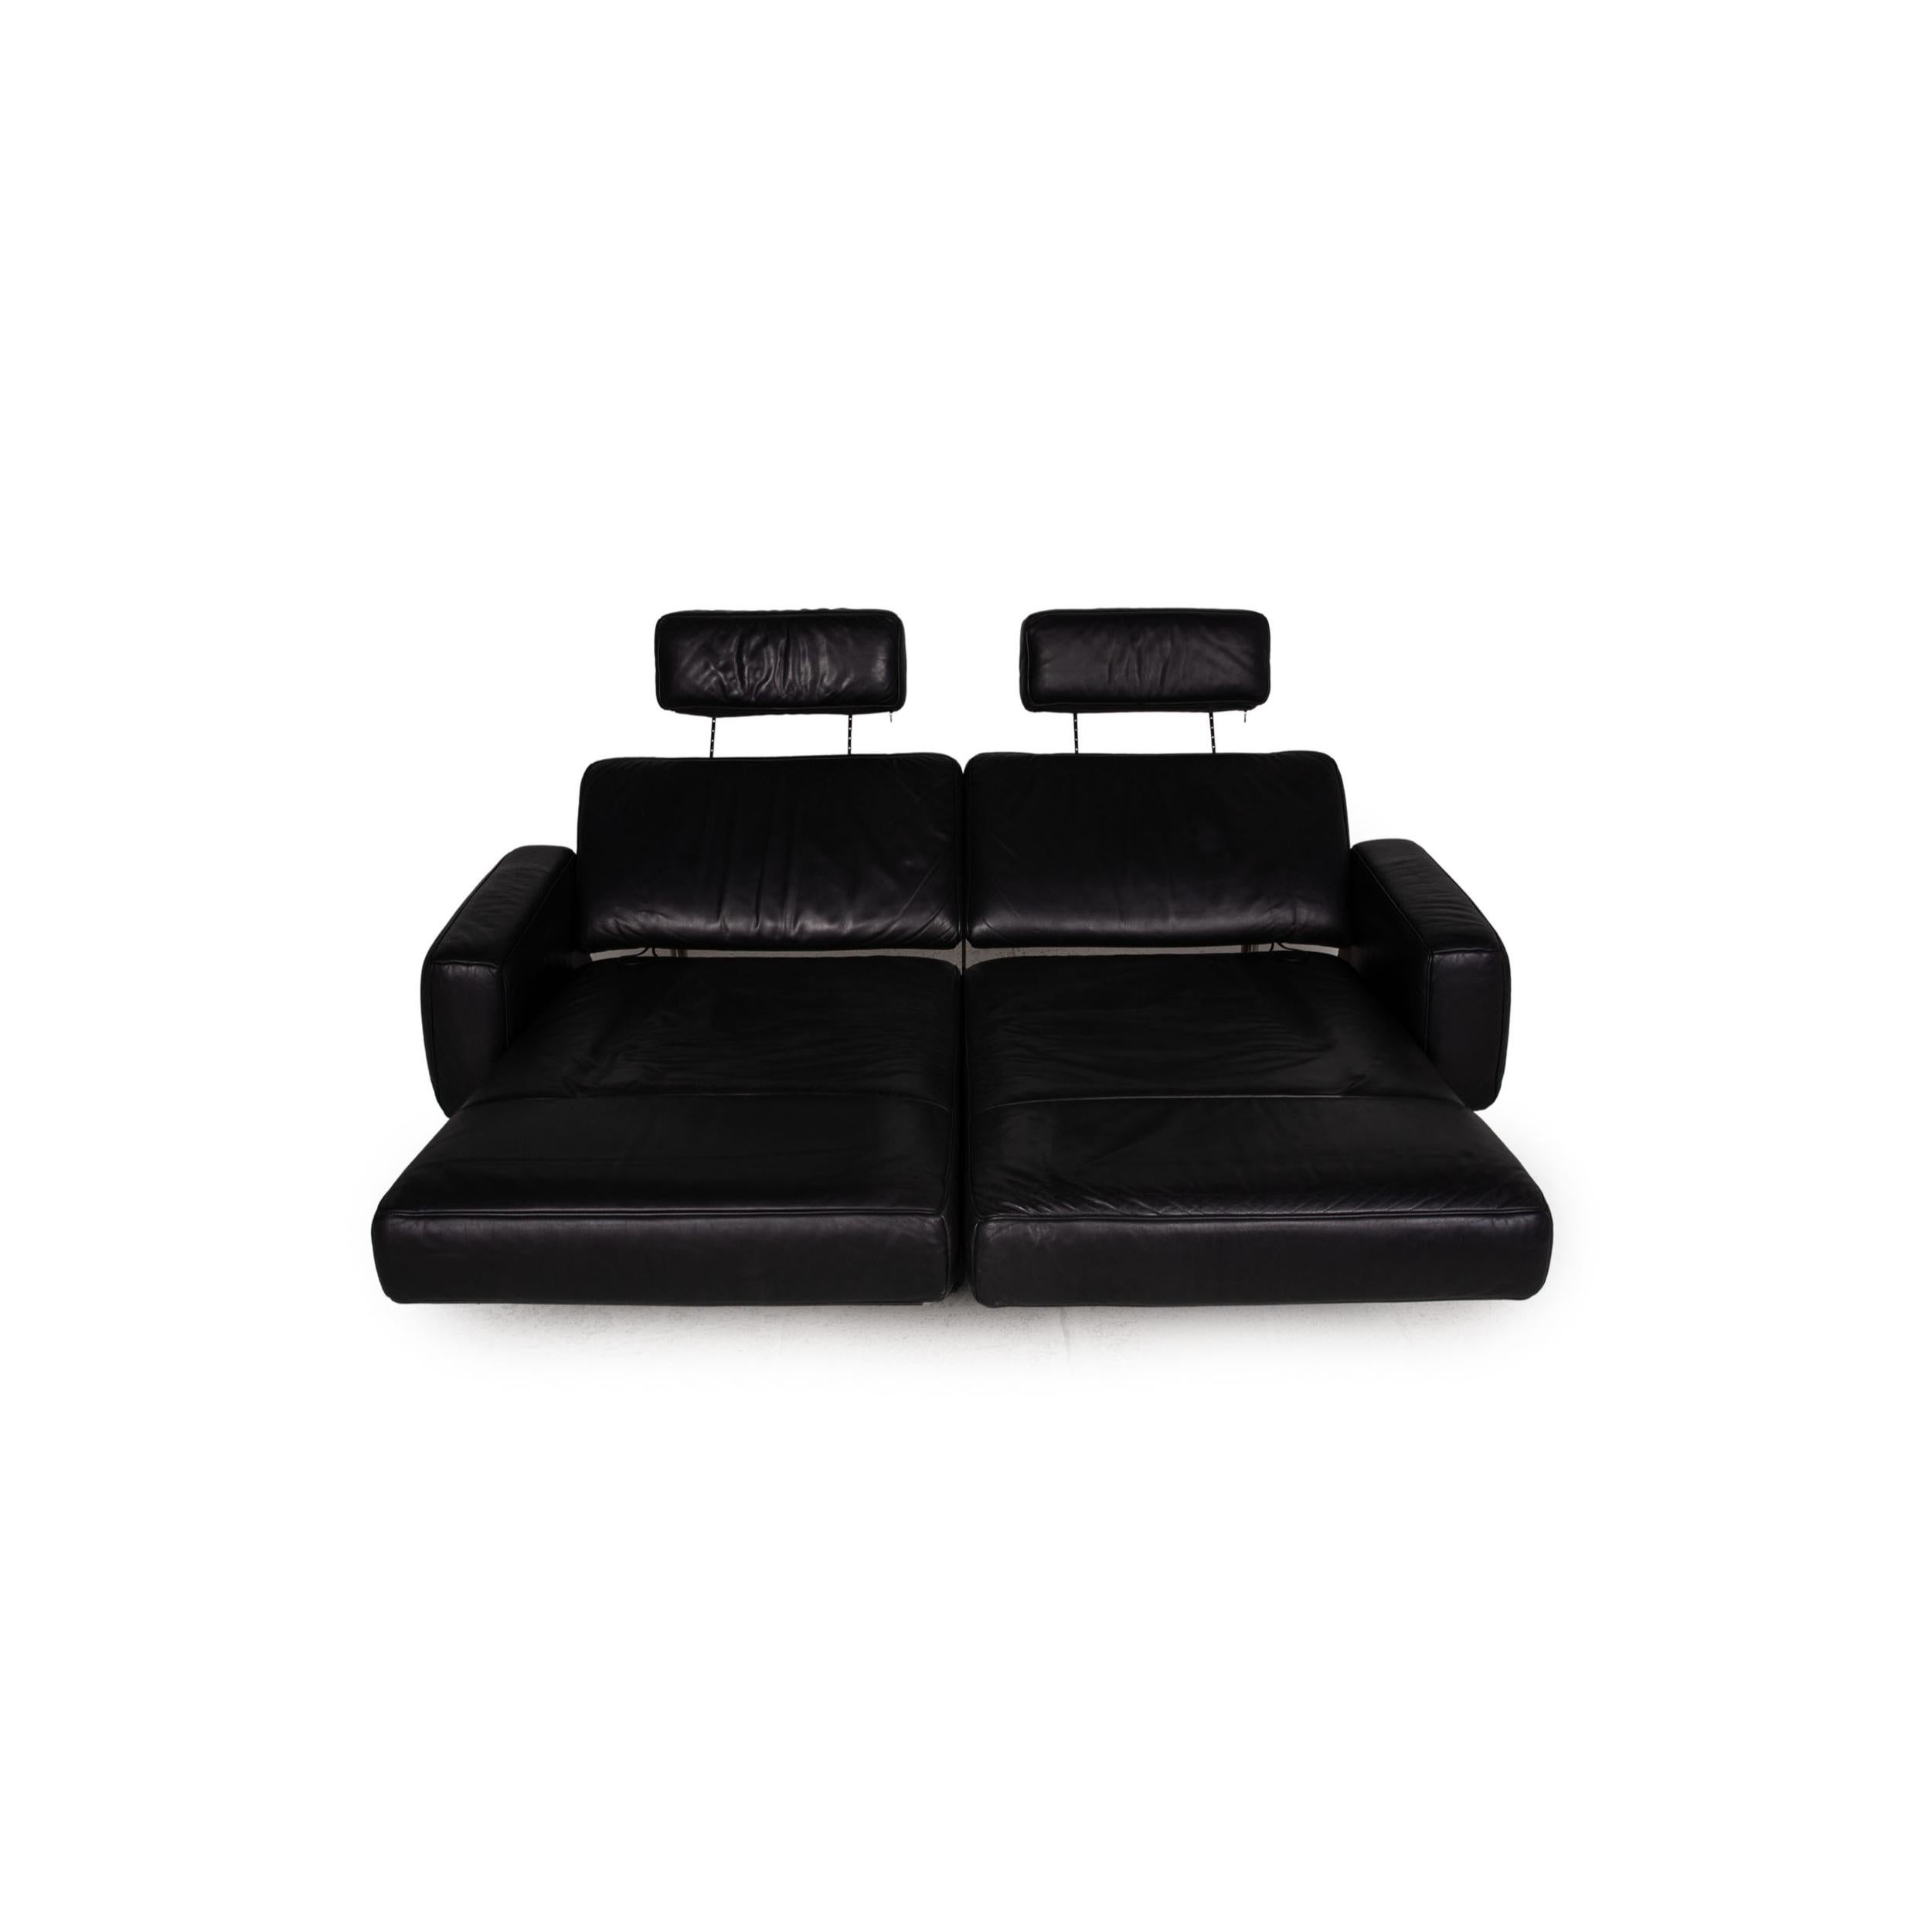 Modern De Sede DS 460 Leather Sofa Black Three-Seater Relaxation Function Couch For Sale